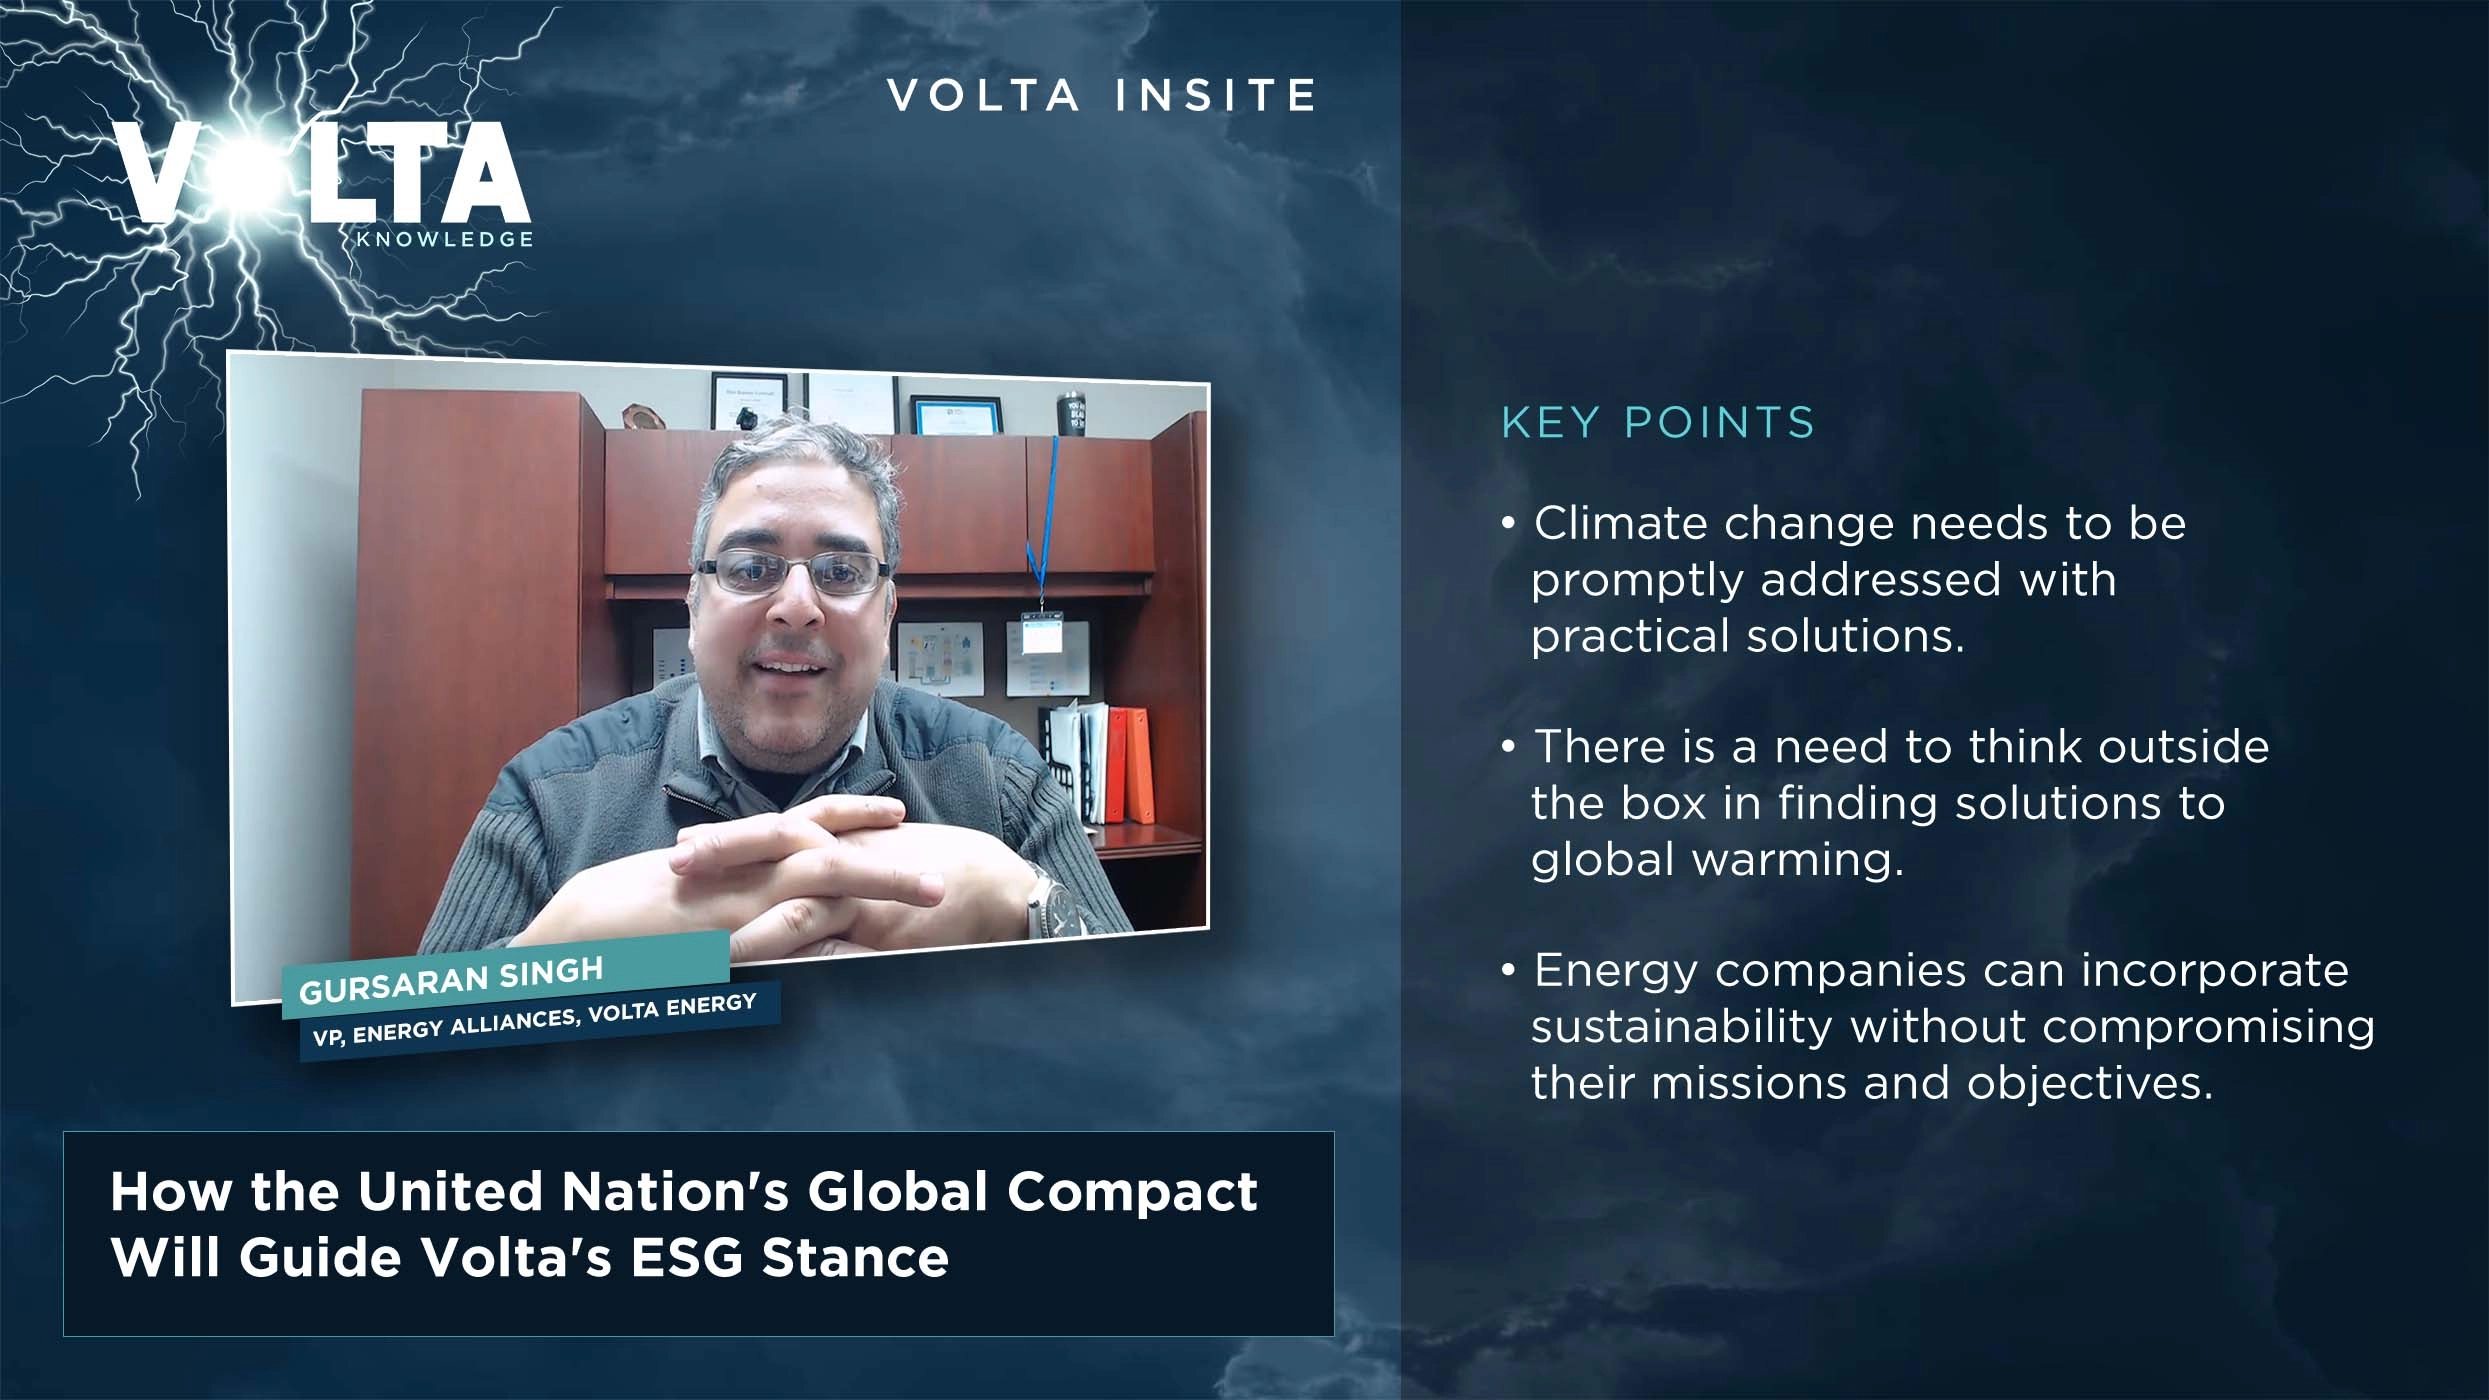 How the United Nation’s Global Compact Will Guide Volta’s ESG Stance